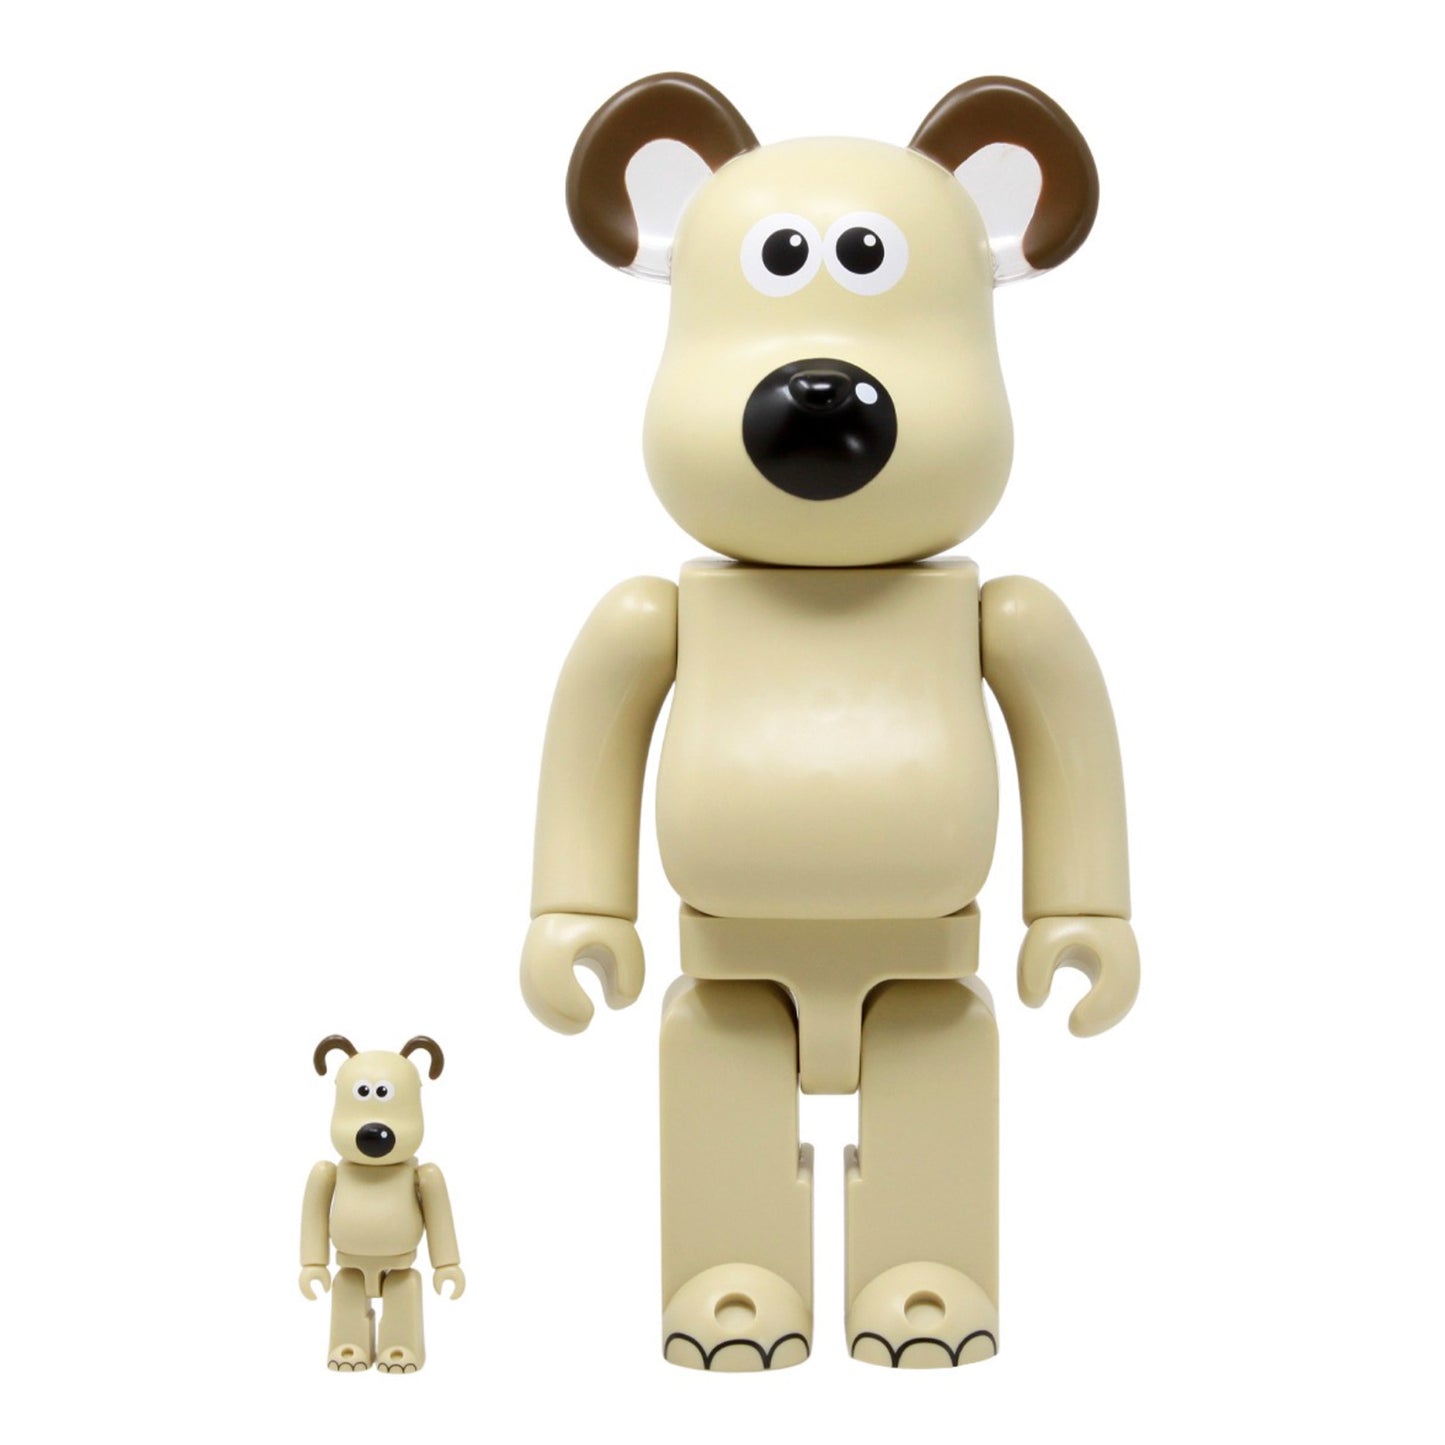 MEDICOM TOY: BE@RBRICK - Wallace and Gromit - Gromit 100% & 400%